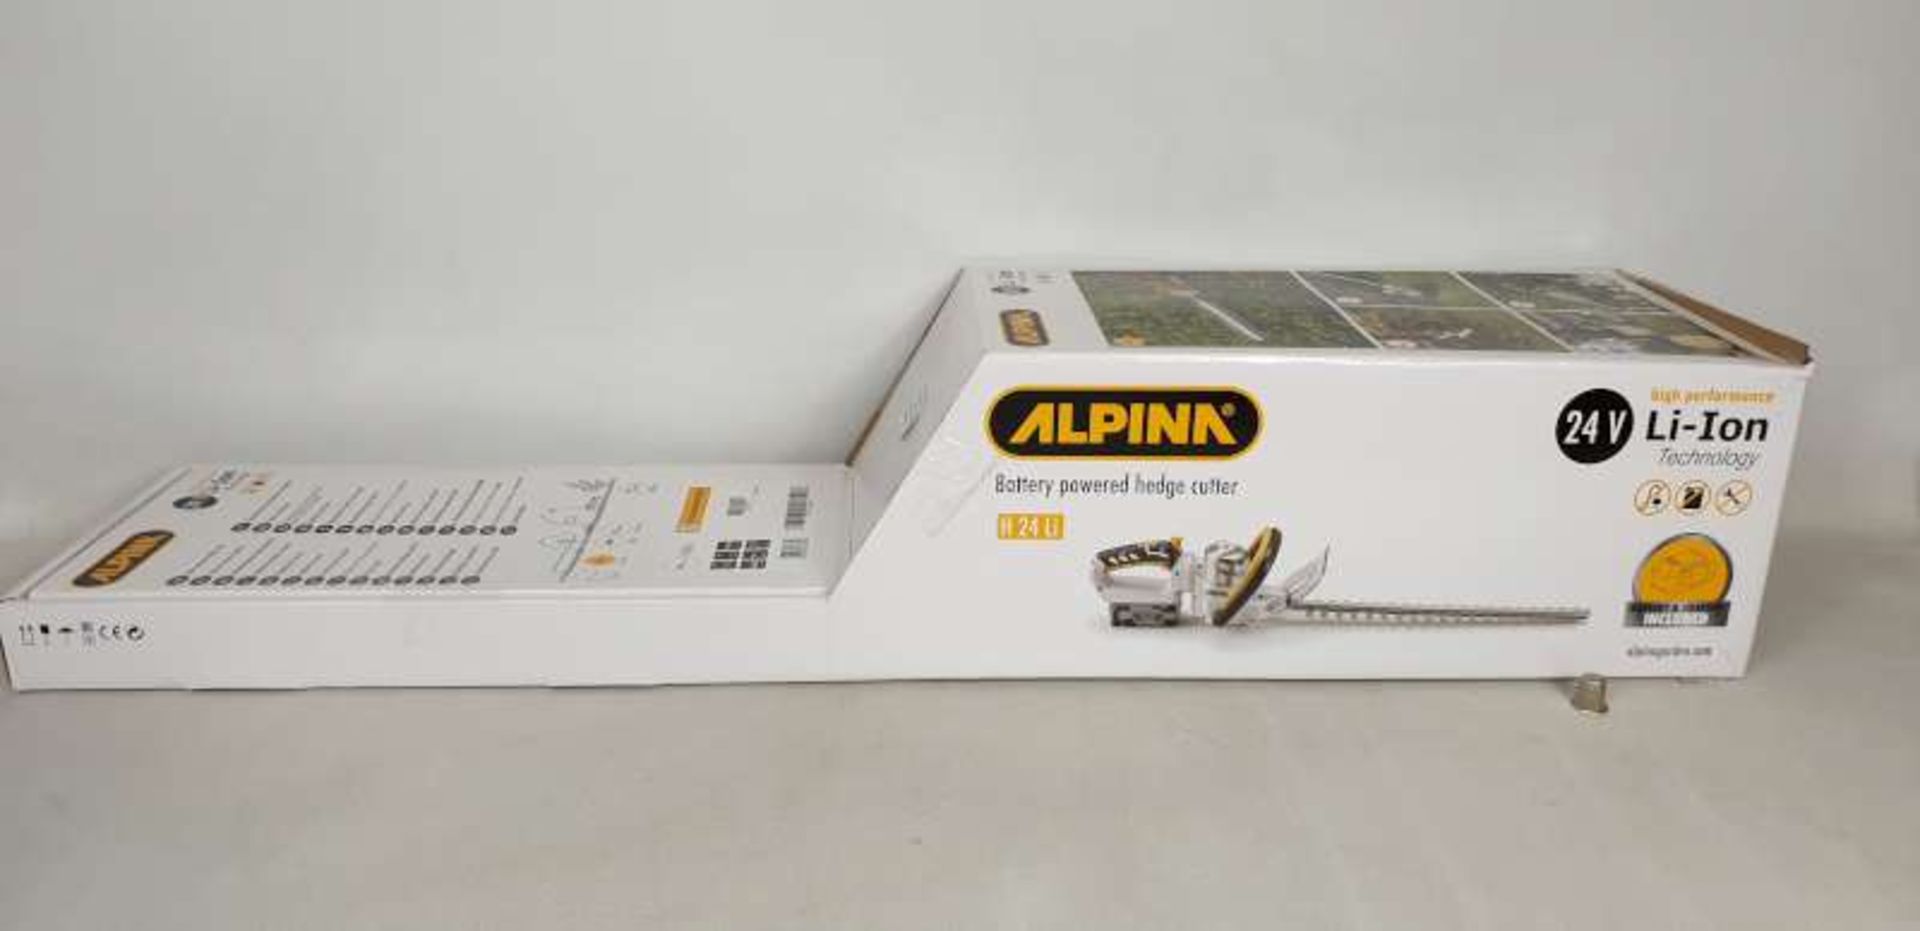 BRAND NEW BOXED ALPINA 24 VOLT LI - ION TECHNOLOGY BATTERY POWERED HEDGE CUTTERS, BATTERY AND